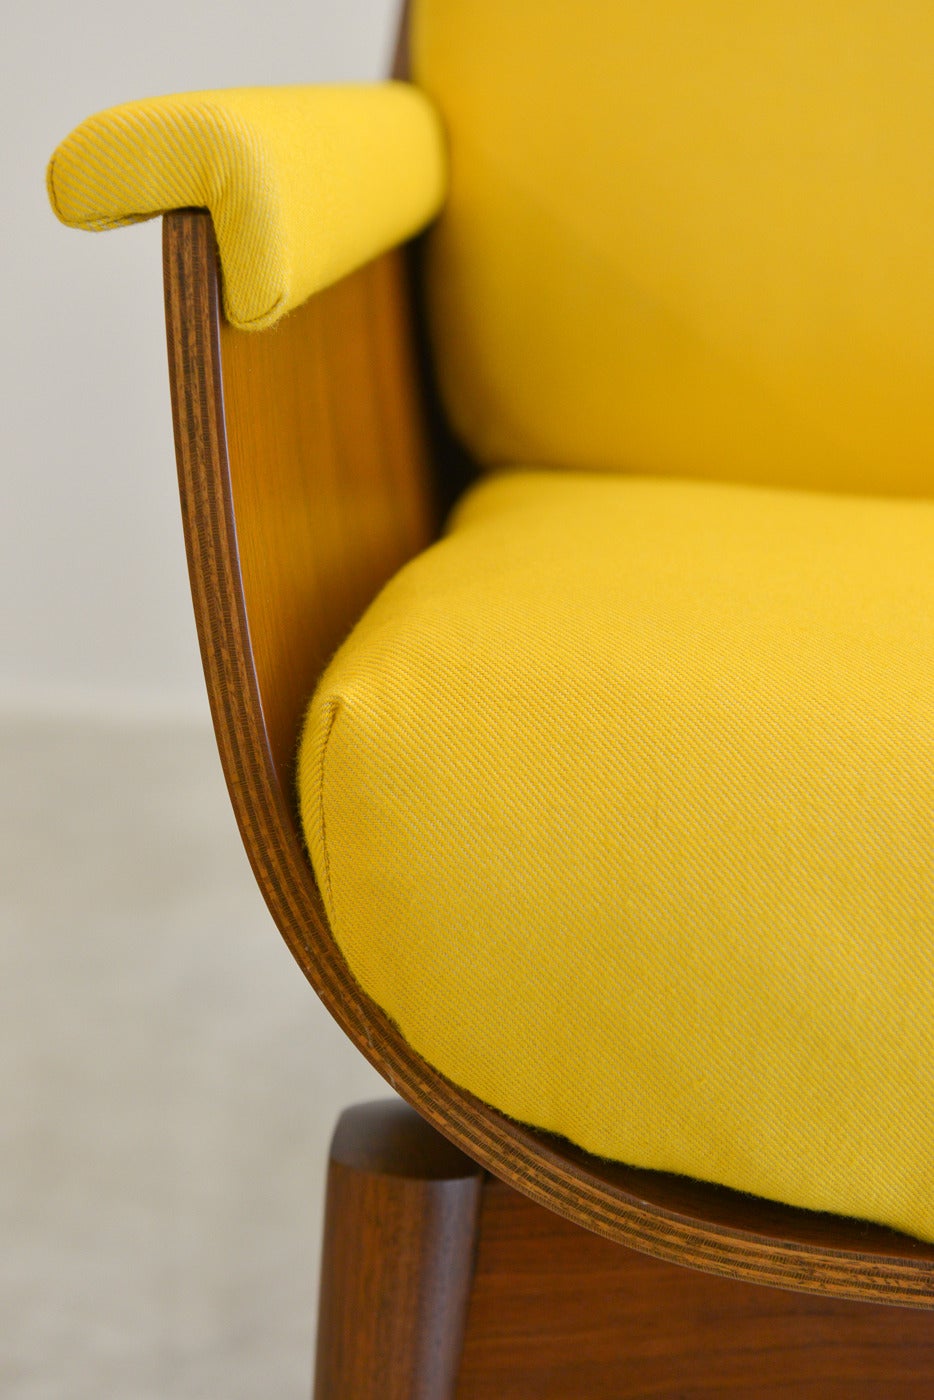 20th Century Walnut Bentwood Scoop Chair in Bright Yellow